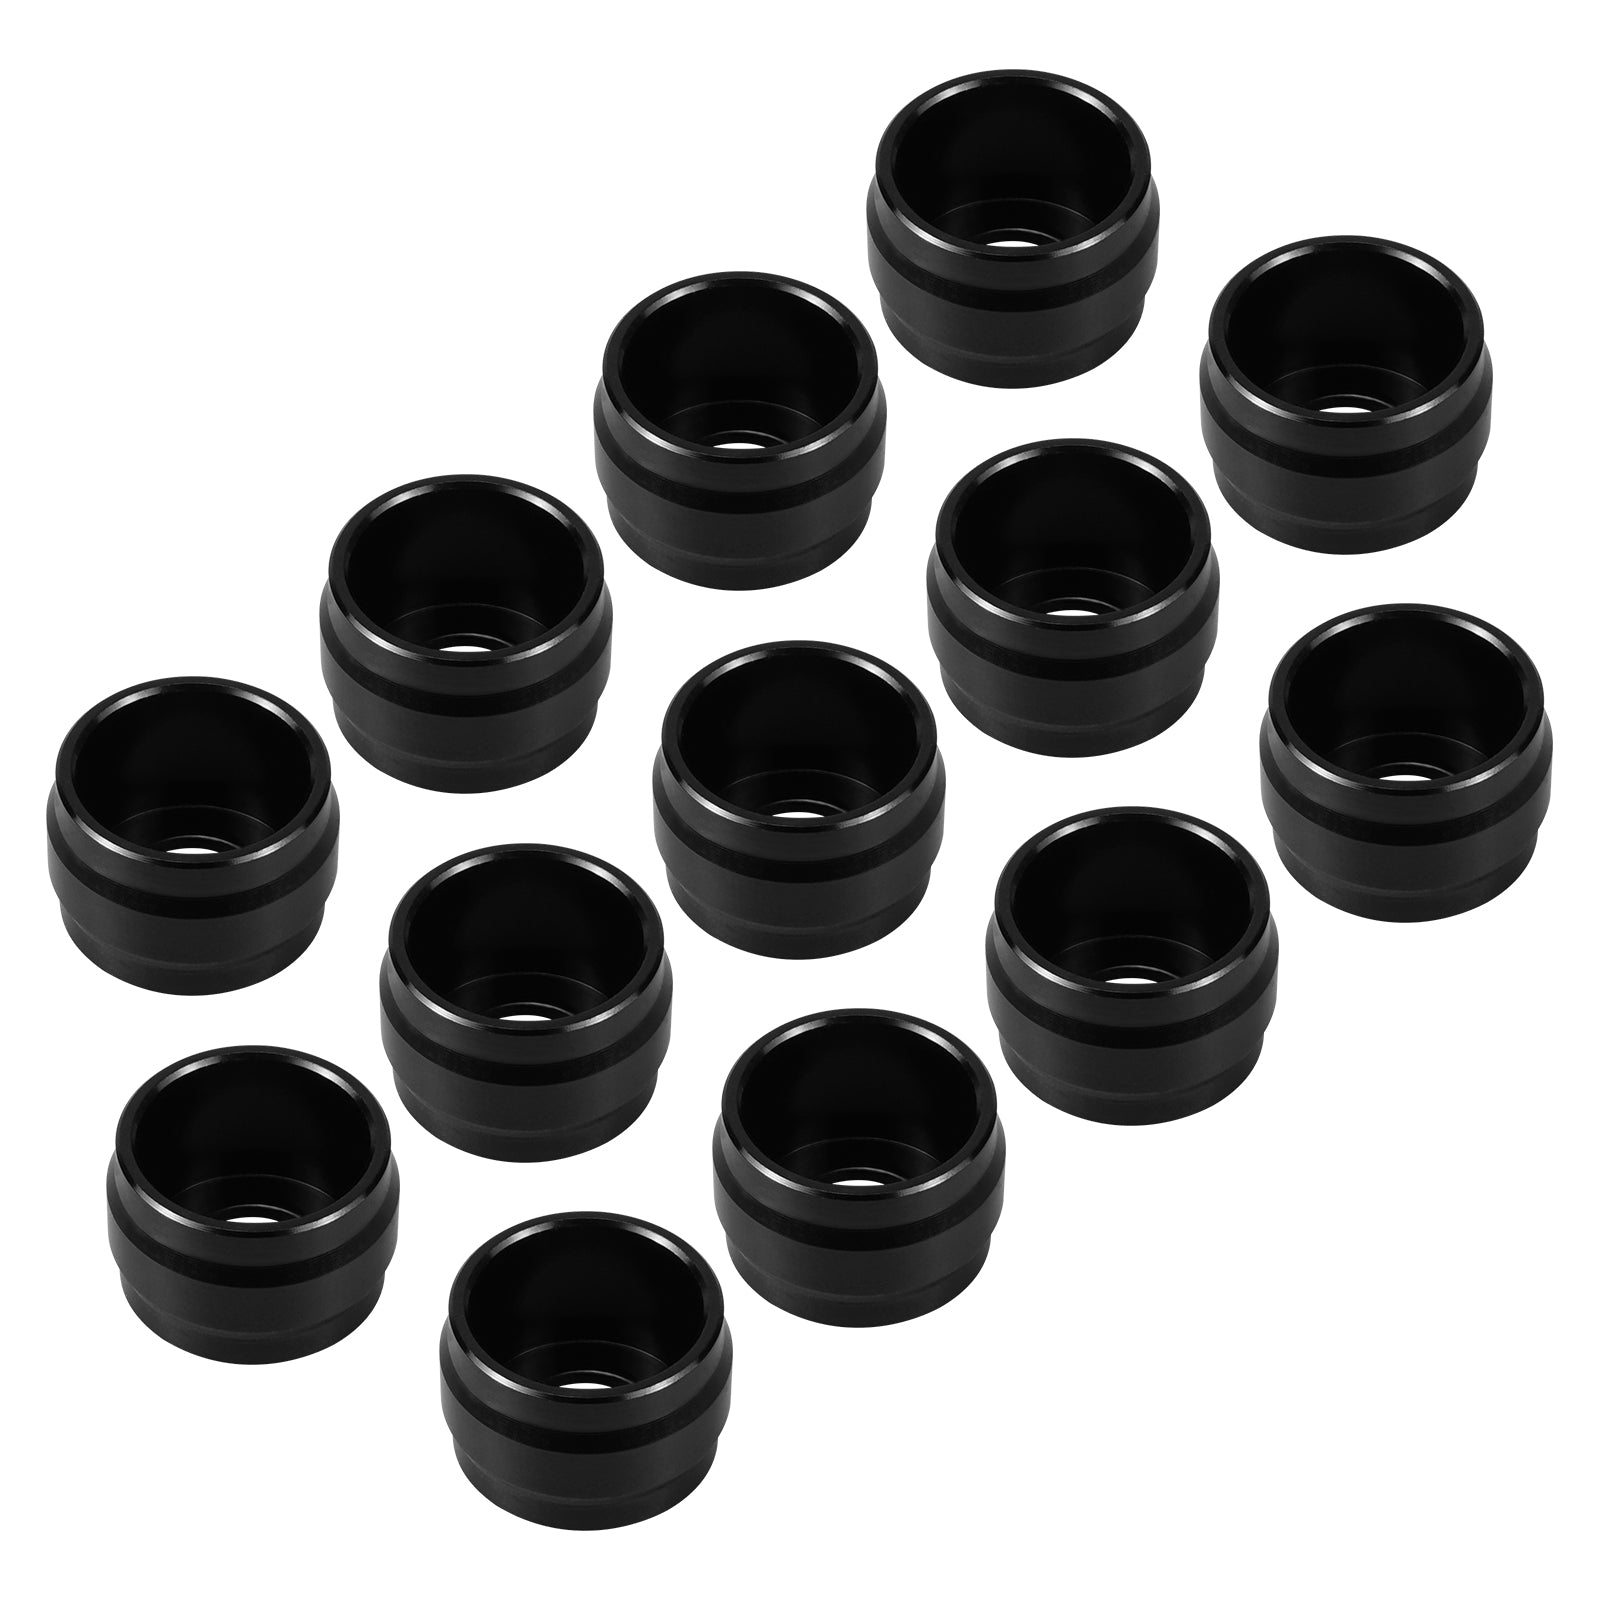 Universal 1/4" Primary Cover Bolt Caps Decorative Trim Rings For Harley Davidson Touring M8 Models 2017-2023